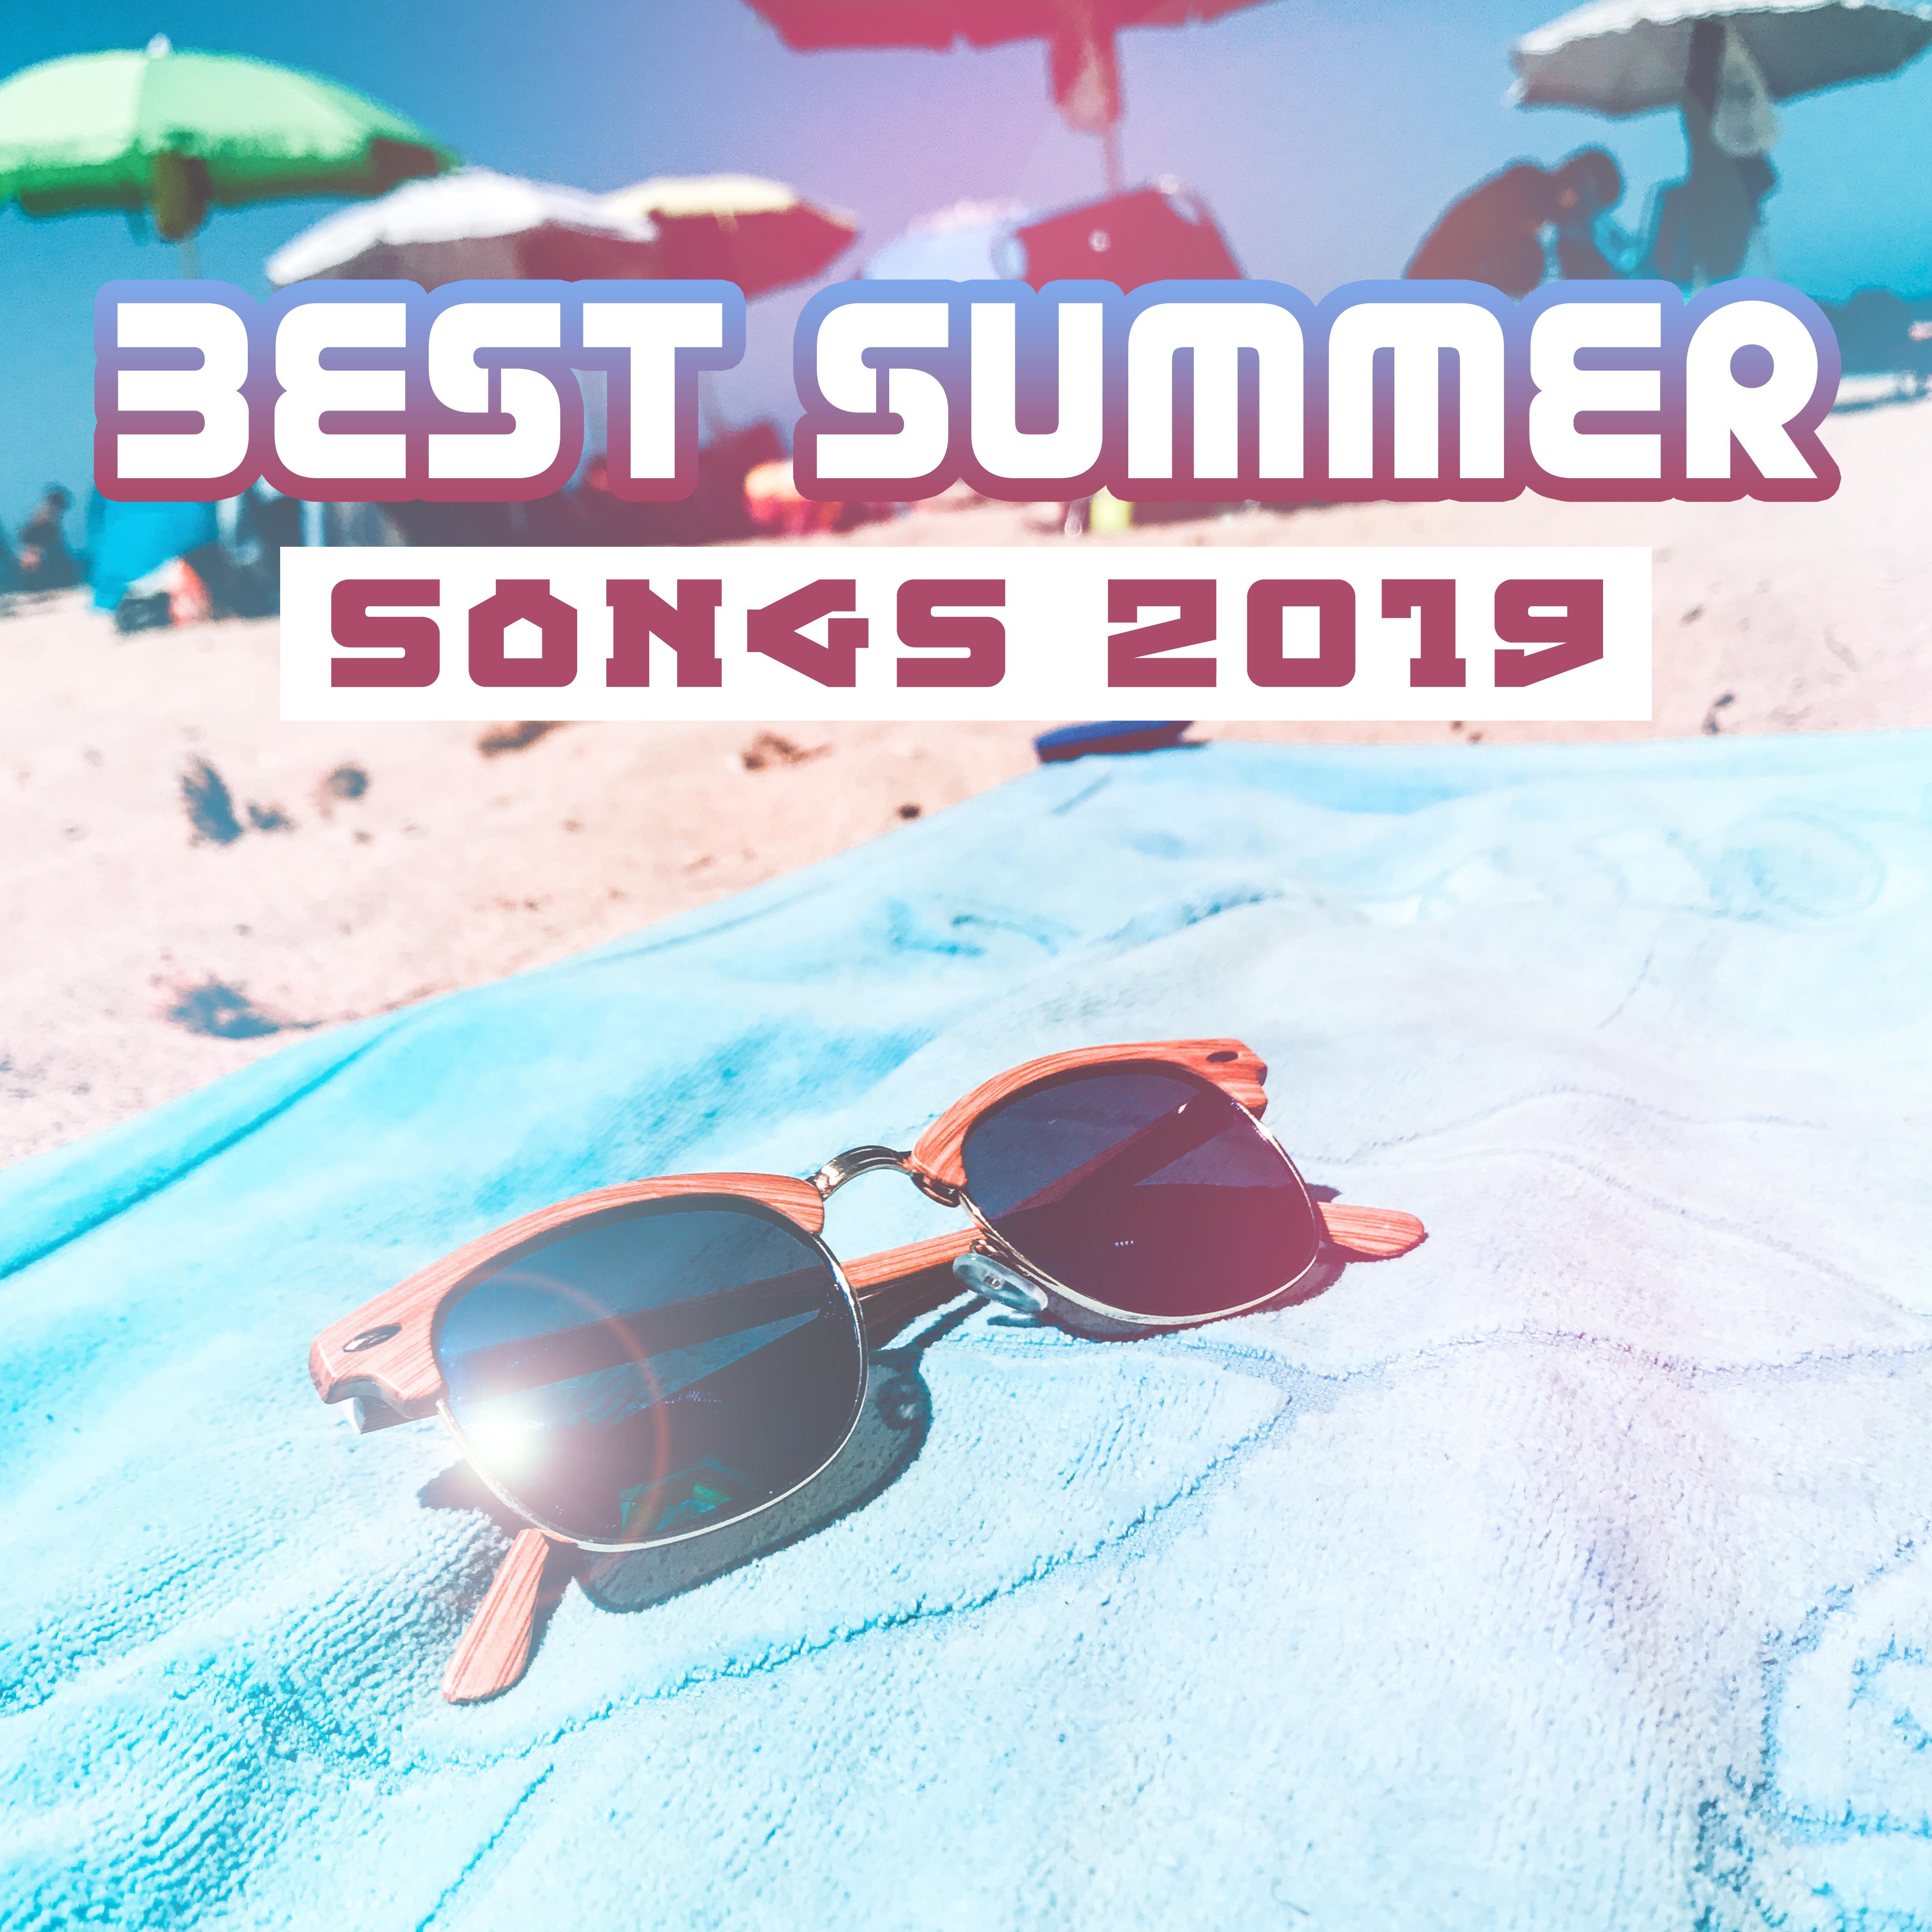 Best Summer Songs 2019 - Summer Balearic Lounge, Relax, Rest, Ibiza 2019, Lounge, Beach Chillout Cafe, Pure Chillout Vibrations